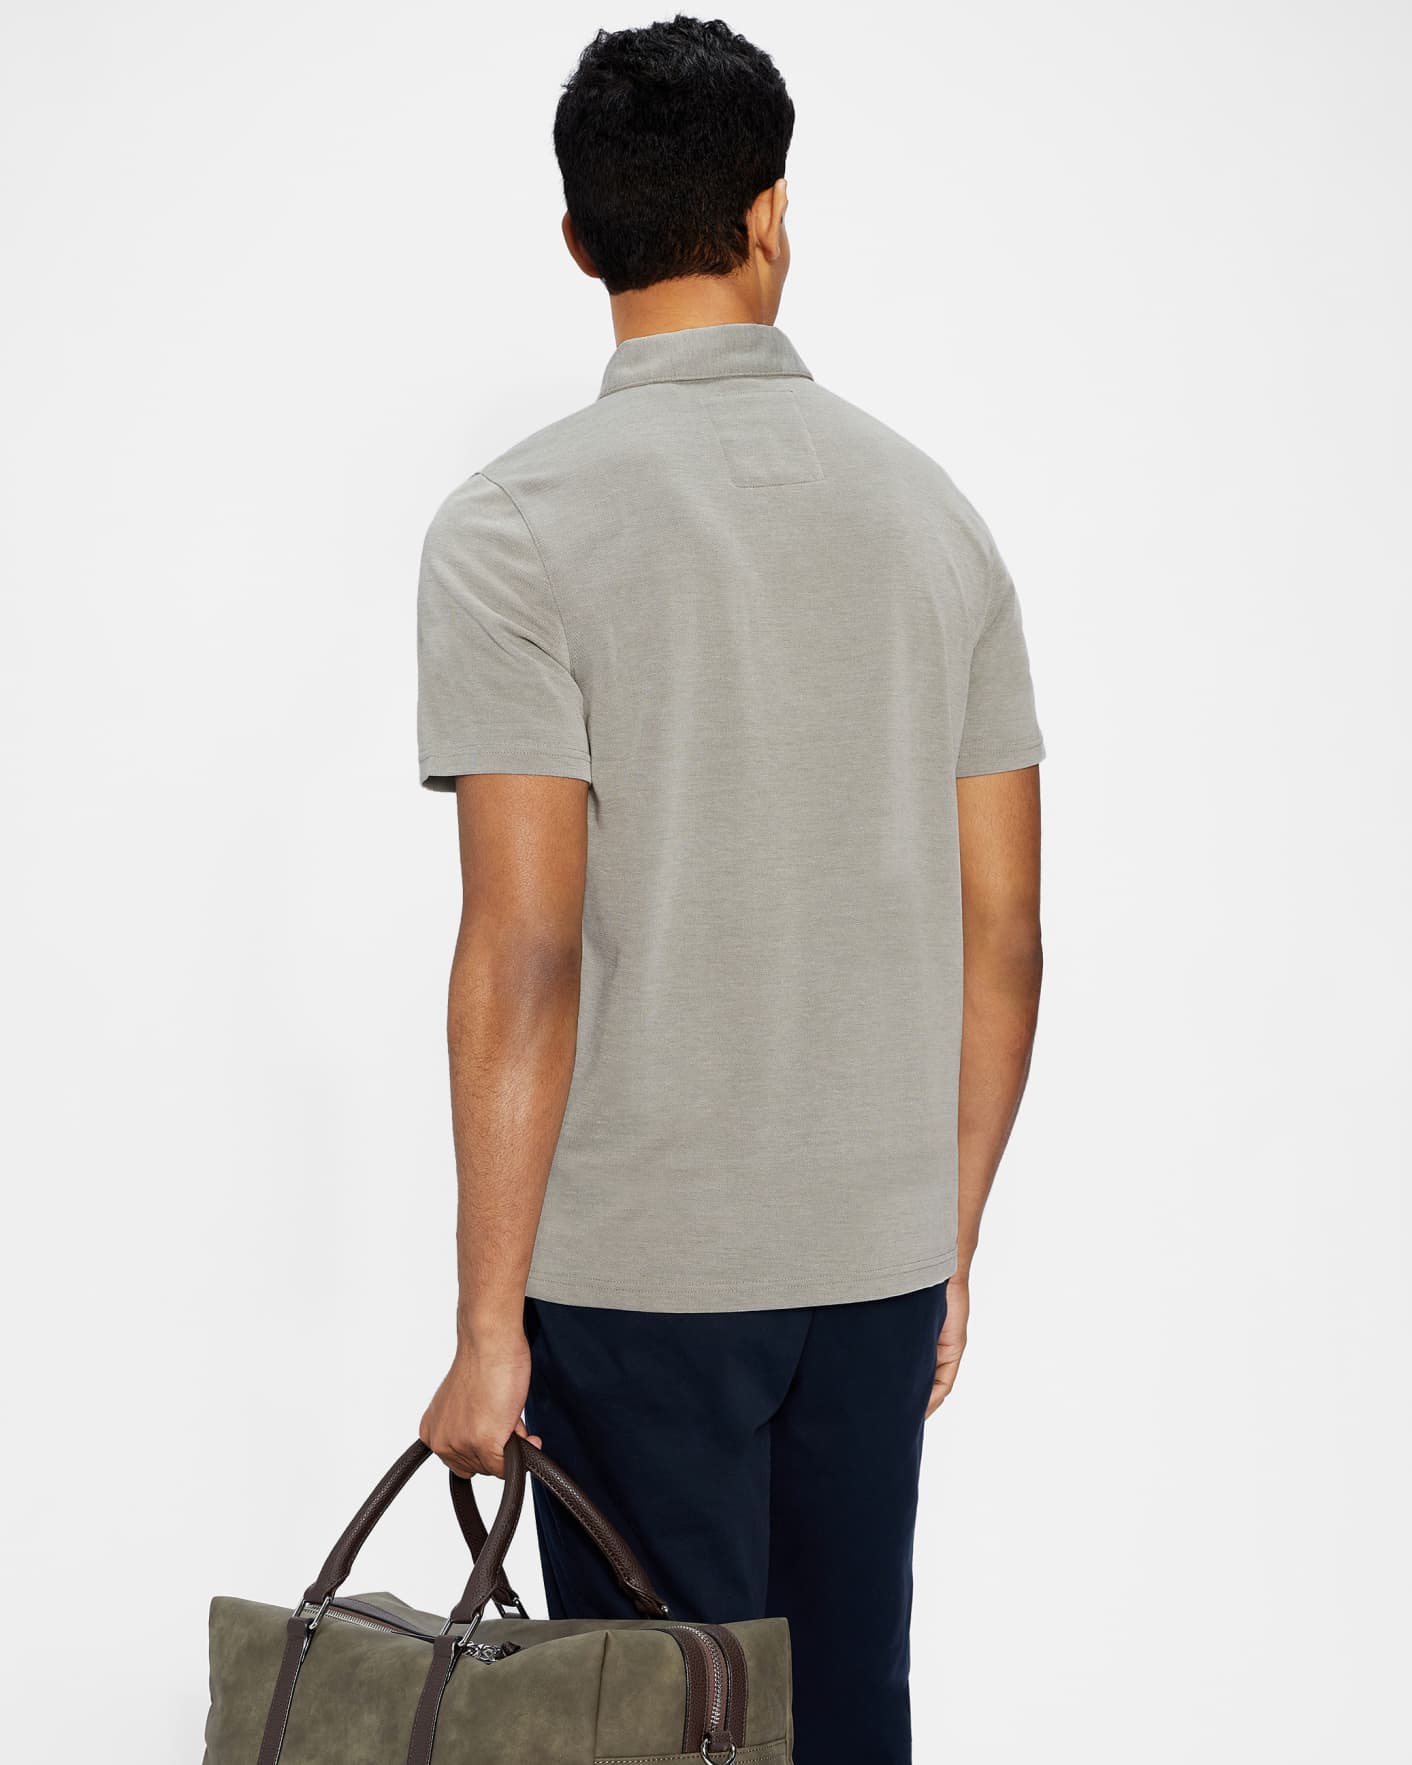 Olive Short Sleeve Soft Touch Polo Ted Baker